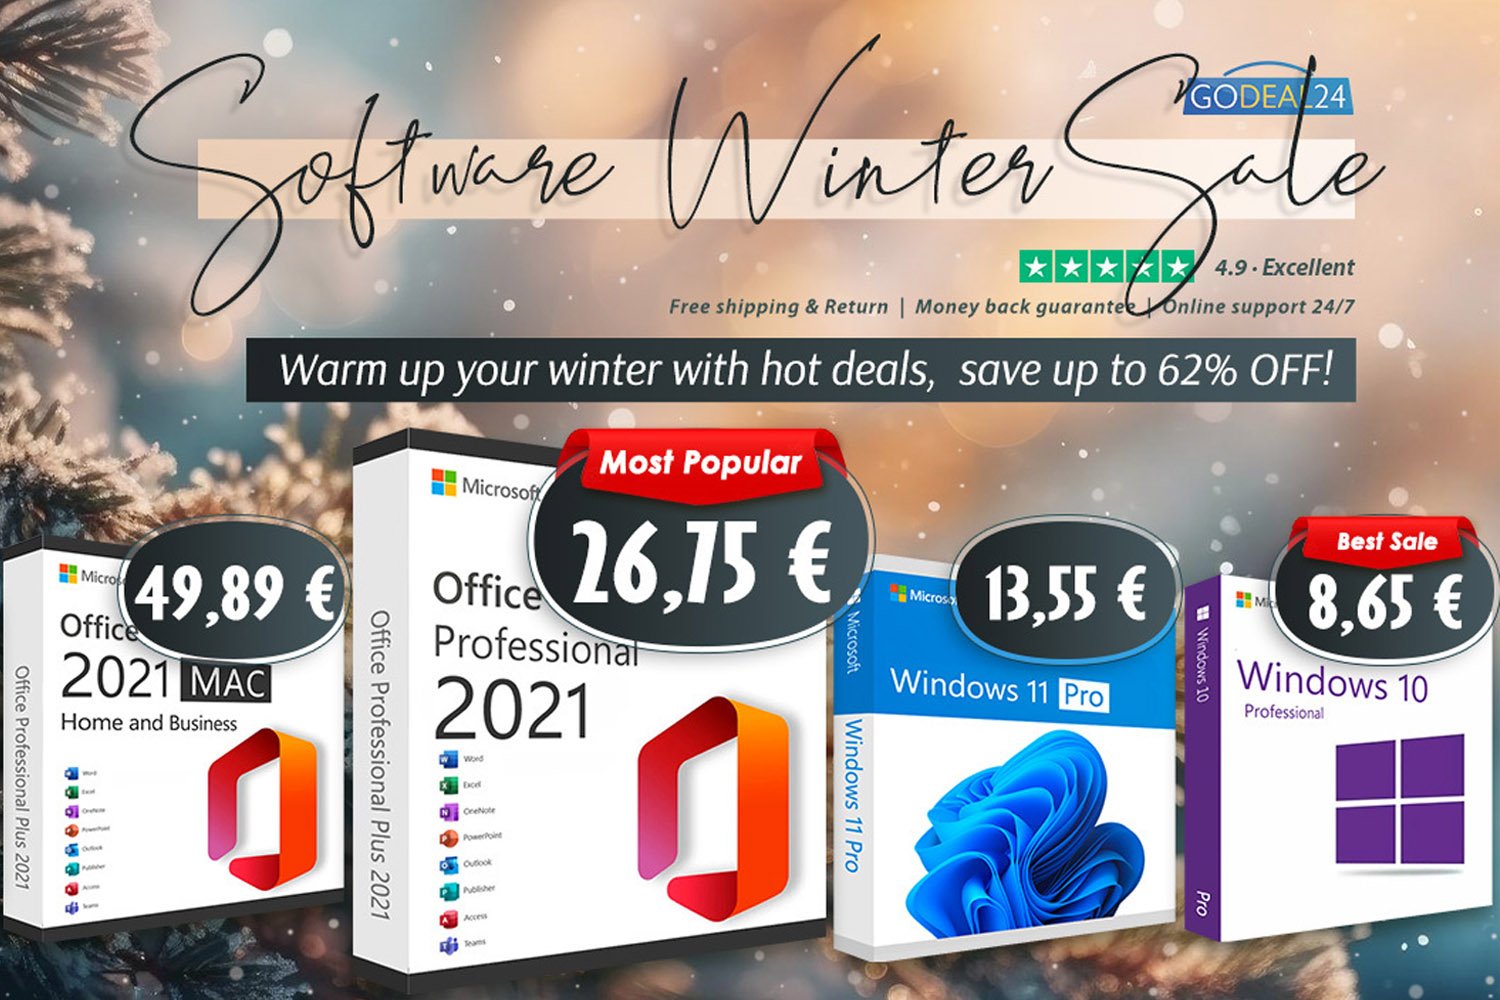 Winter Sale Godeal24